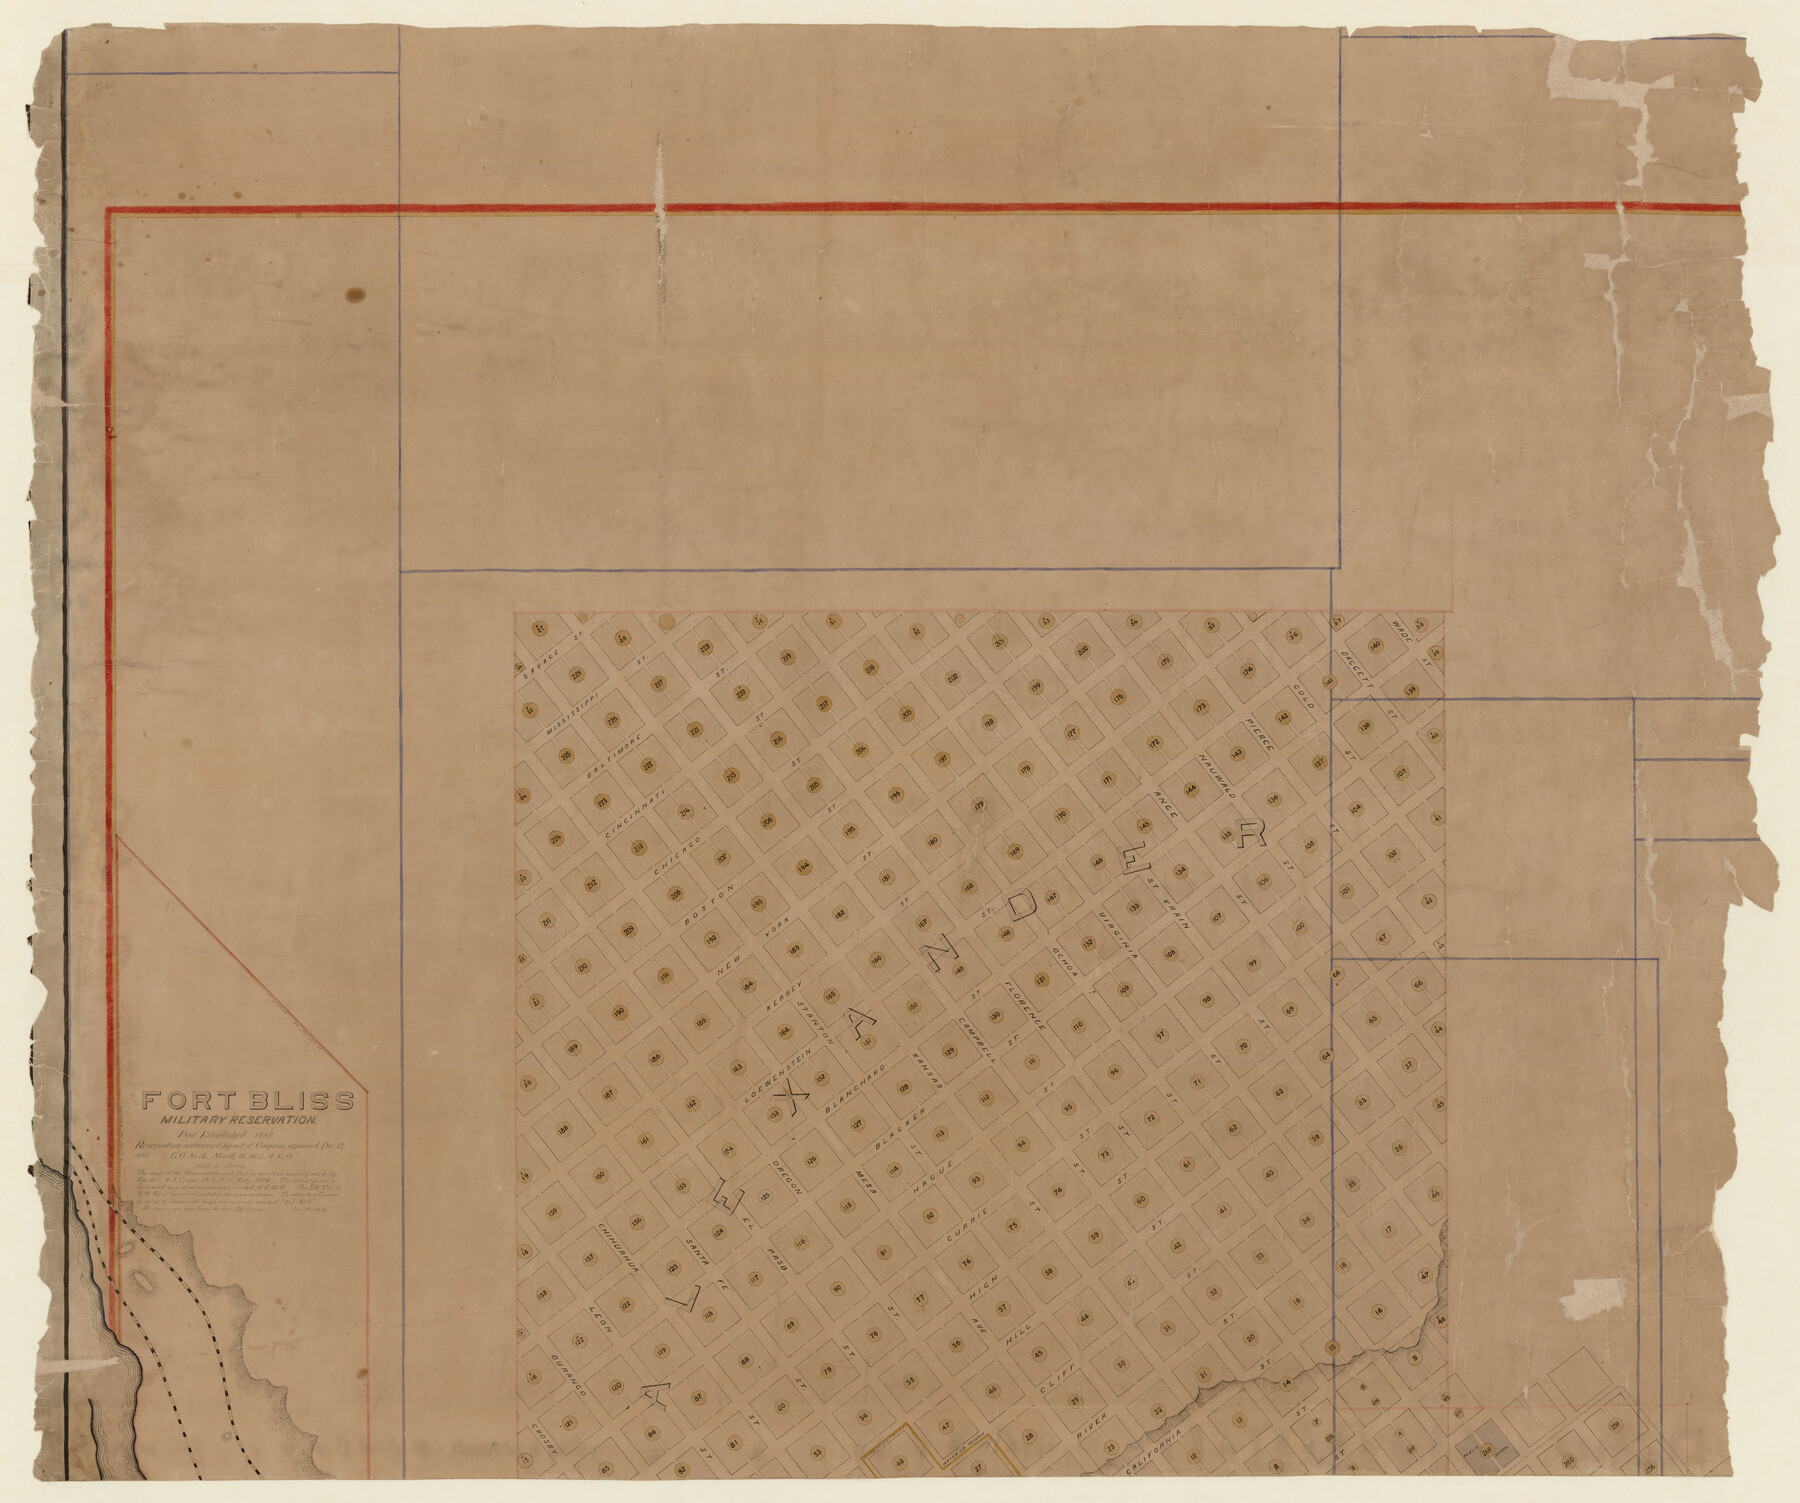 89615, The Official Map of the City of El Paso, State of Texas, Non-GLO Digital Images